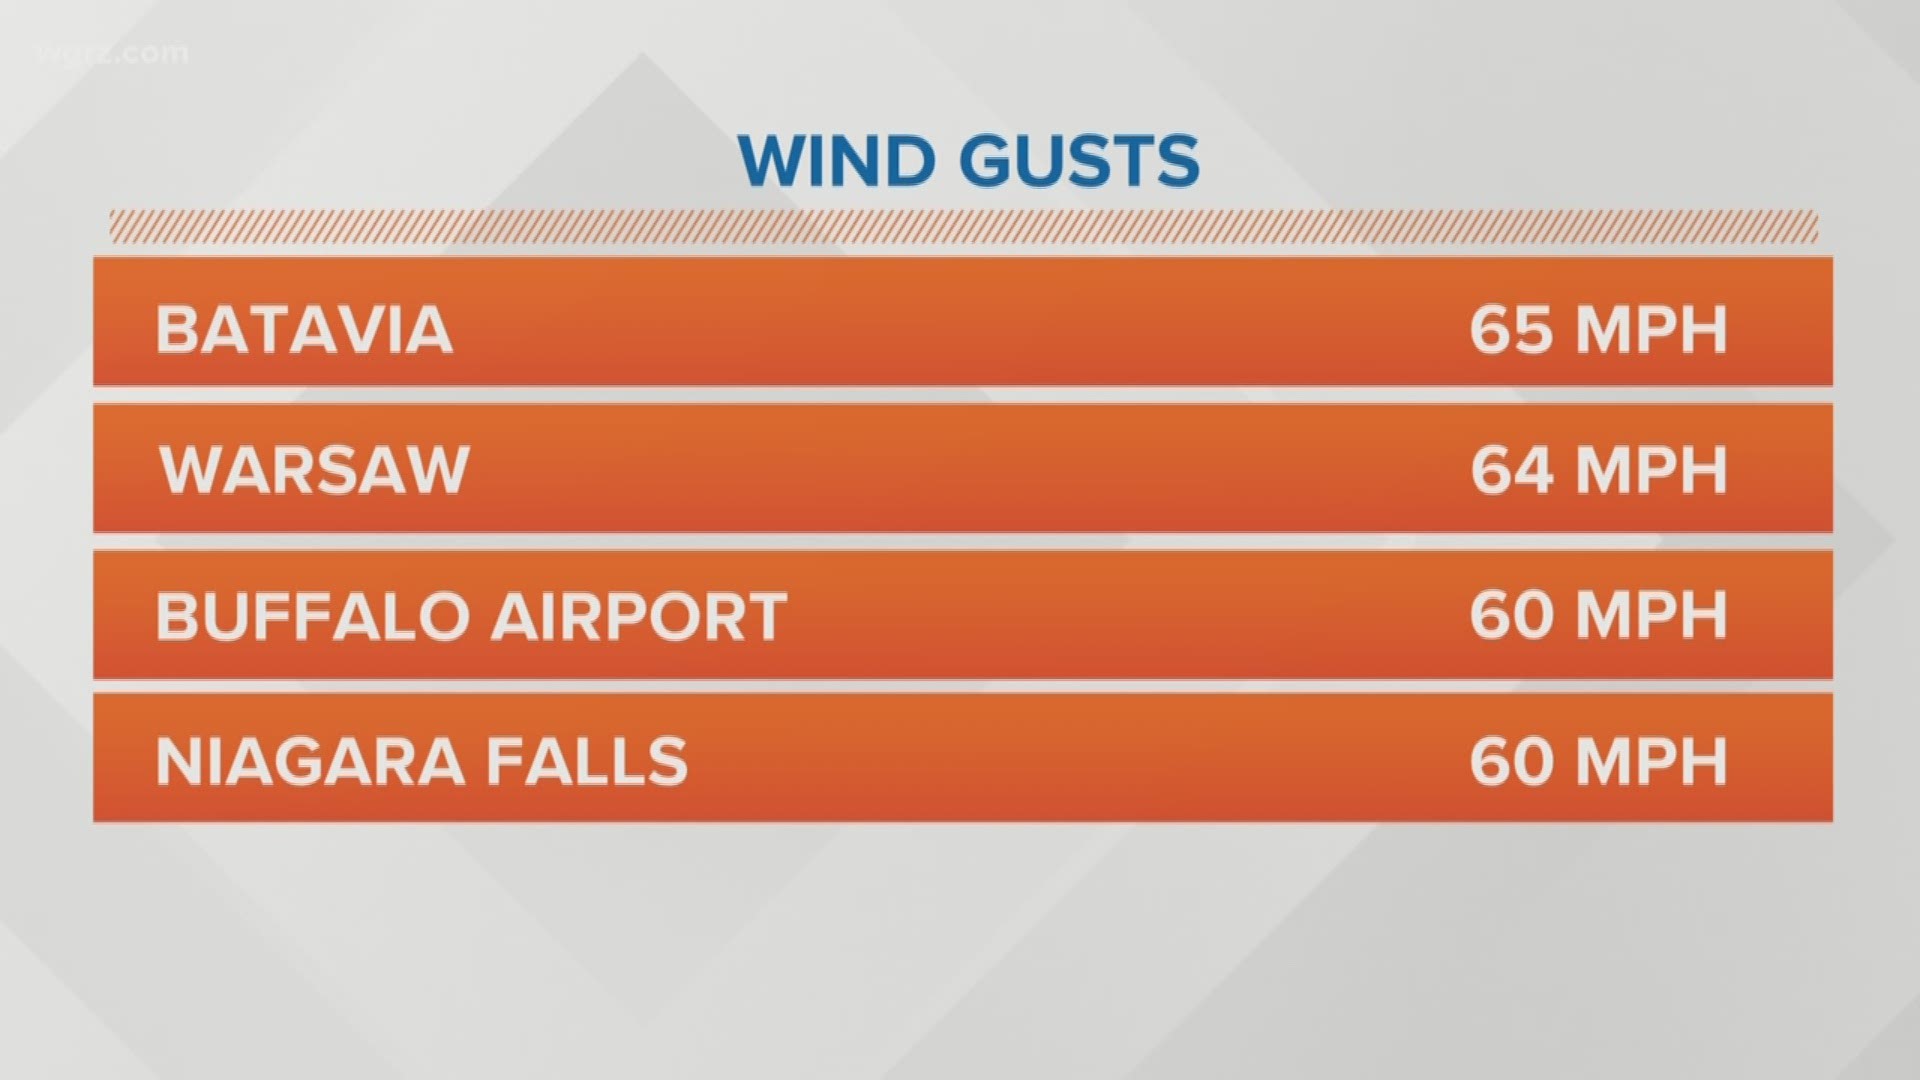 Gusty winds were blowing through WNY Wednesday.